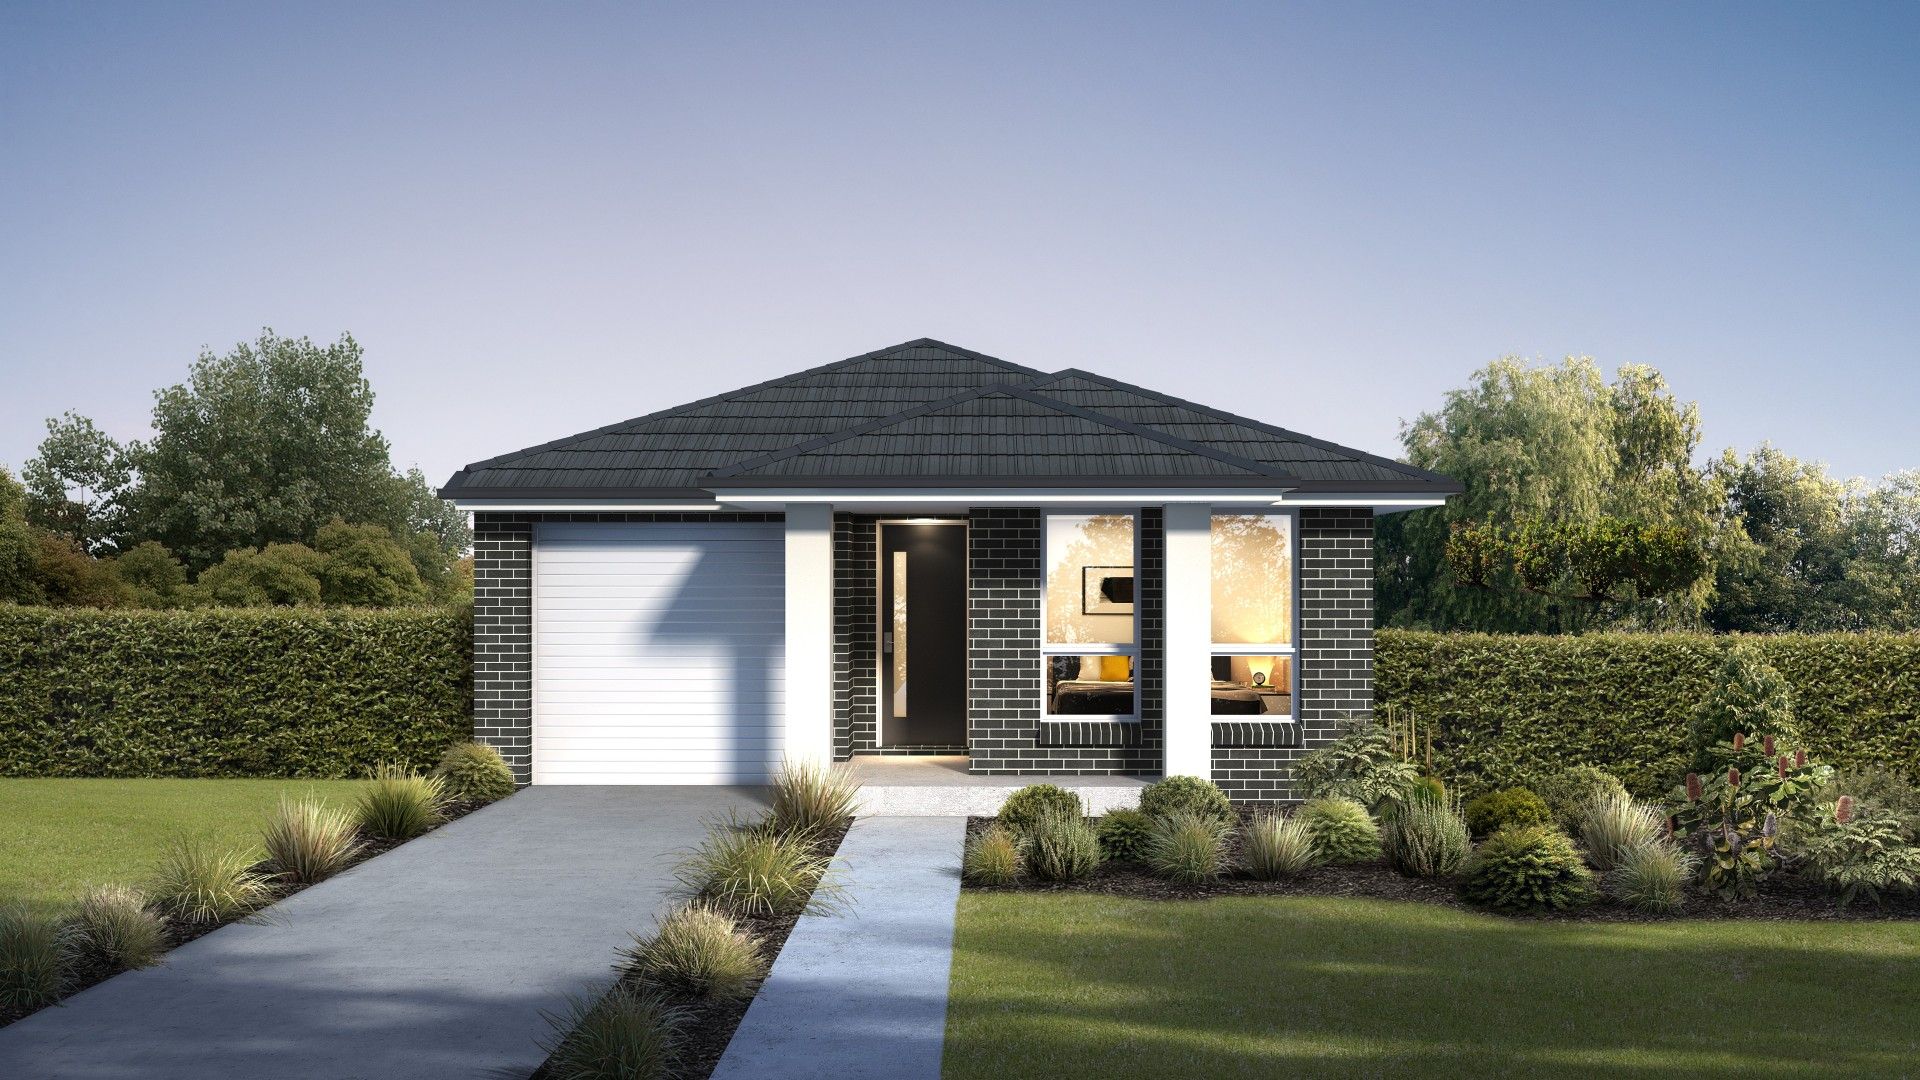 3 bedrooms New House & Land in Lot A Proposed road GLEDSWOOD HILLS NSW, 2557